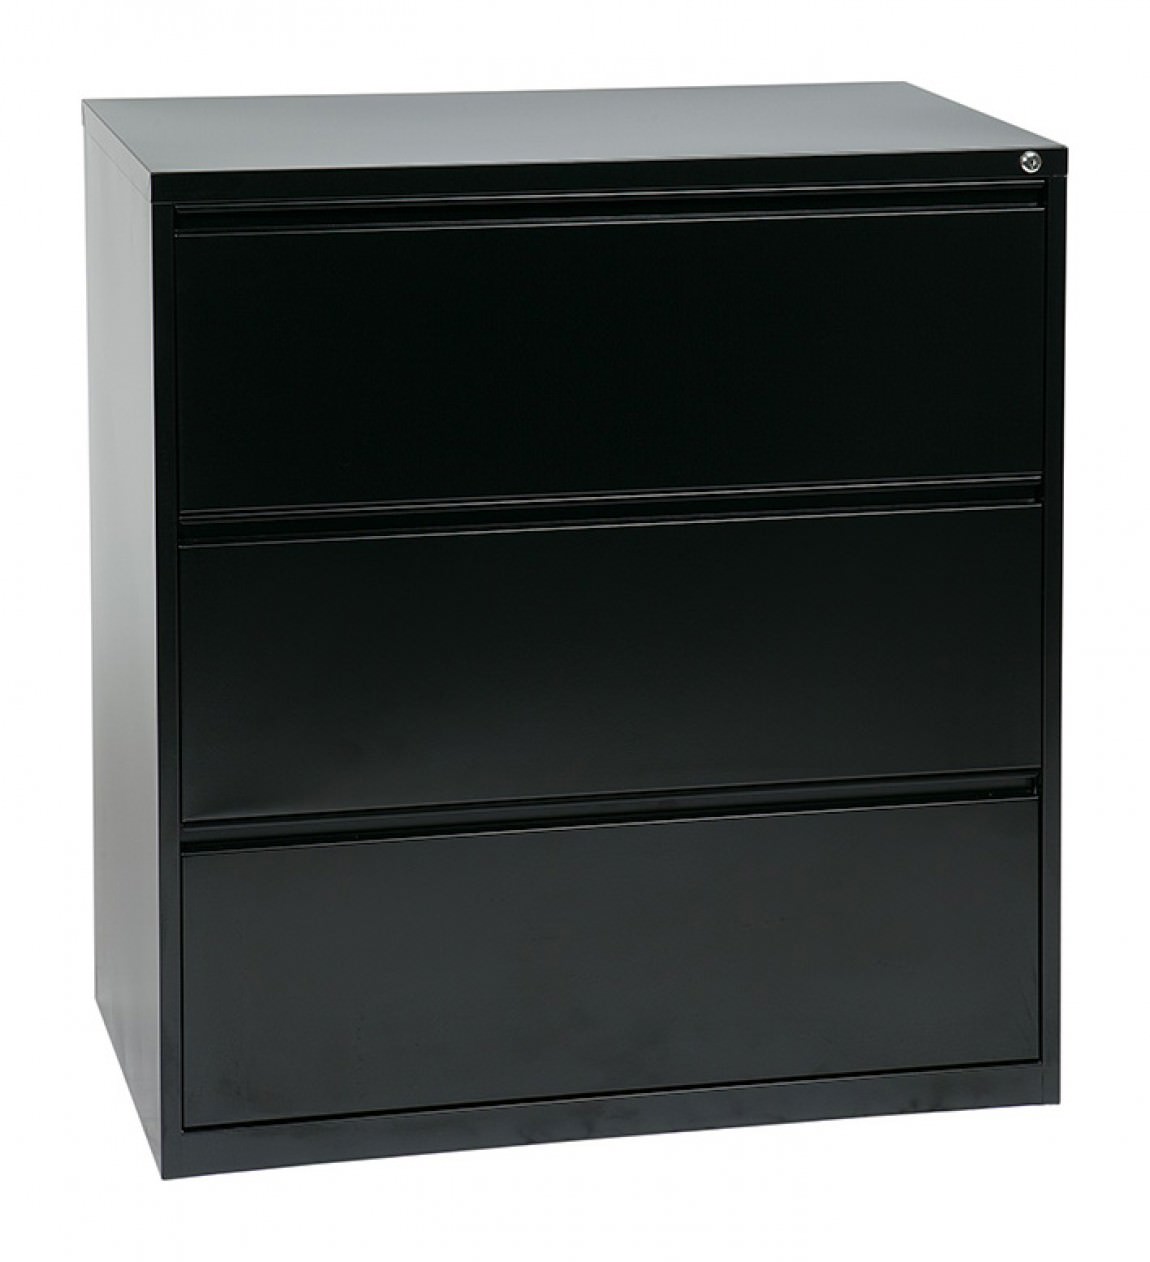 Silver 3 Drawer Lateral Filing Cabinet 36 Wide Osp By Office Star Products